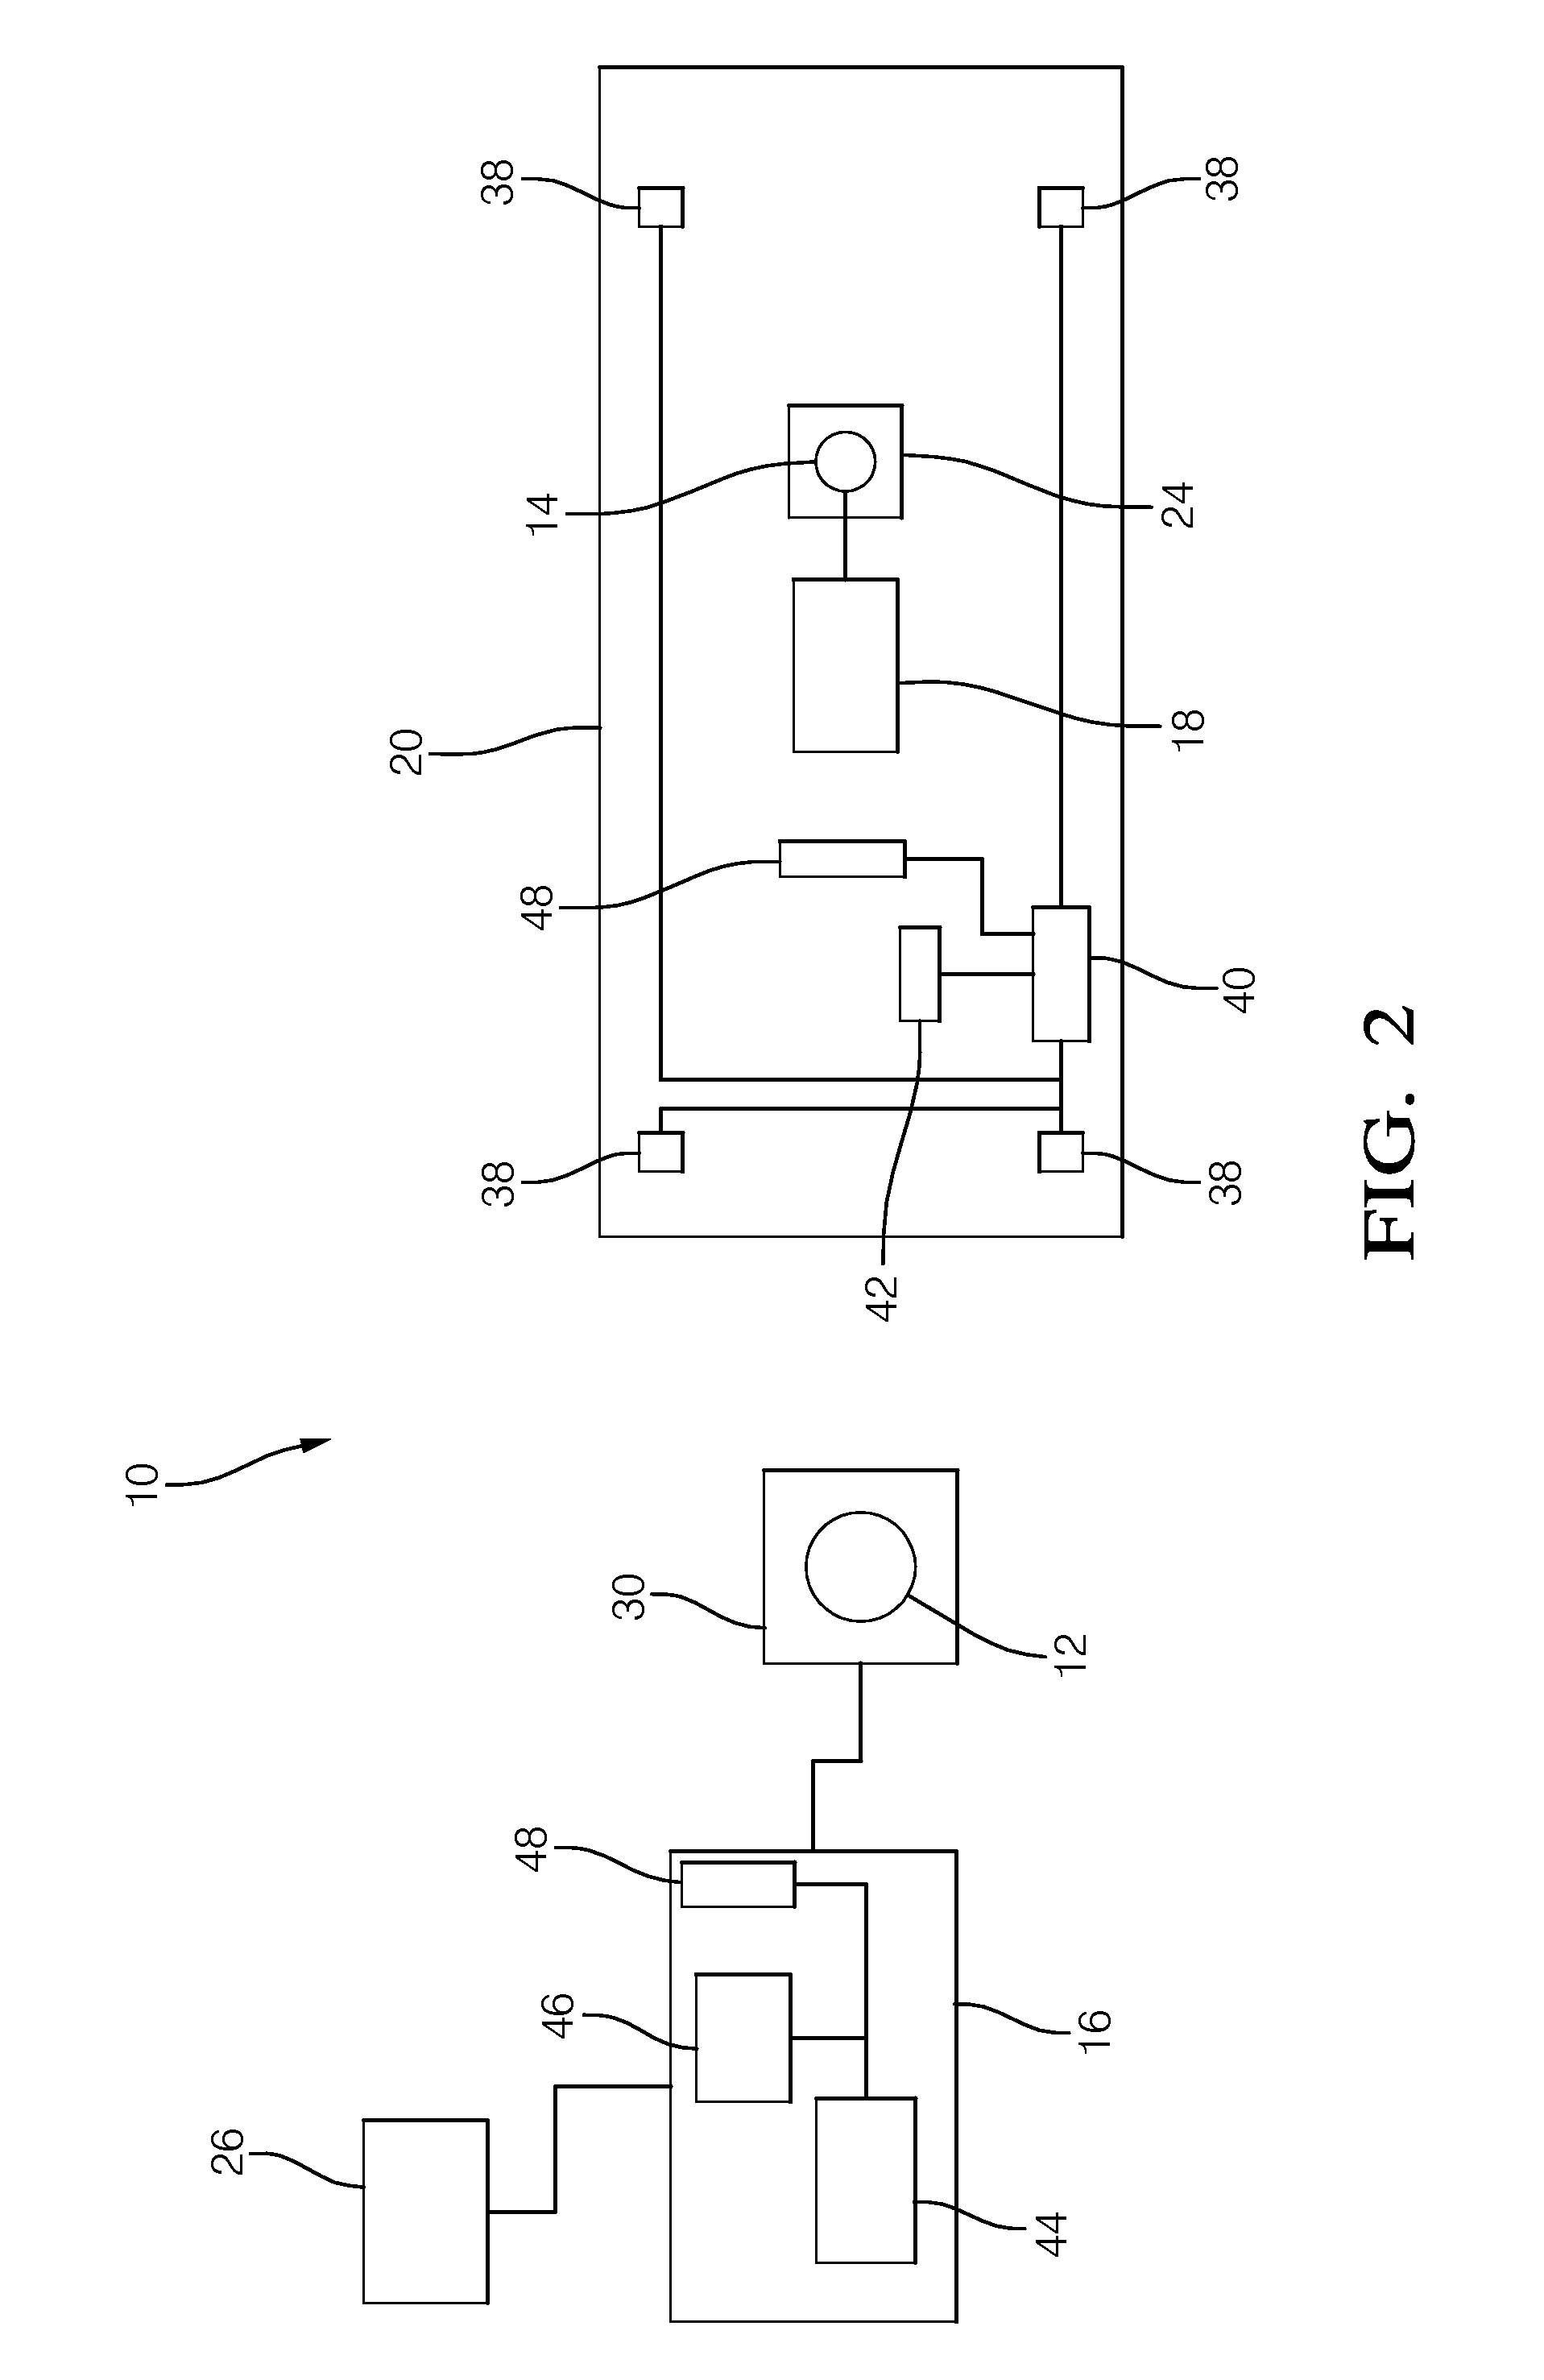 System and method to align a source resonator and a capture resonator for wireless electrical power transfer